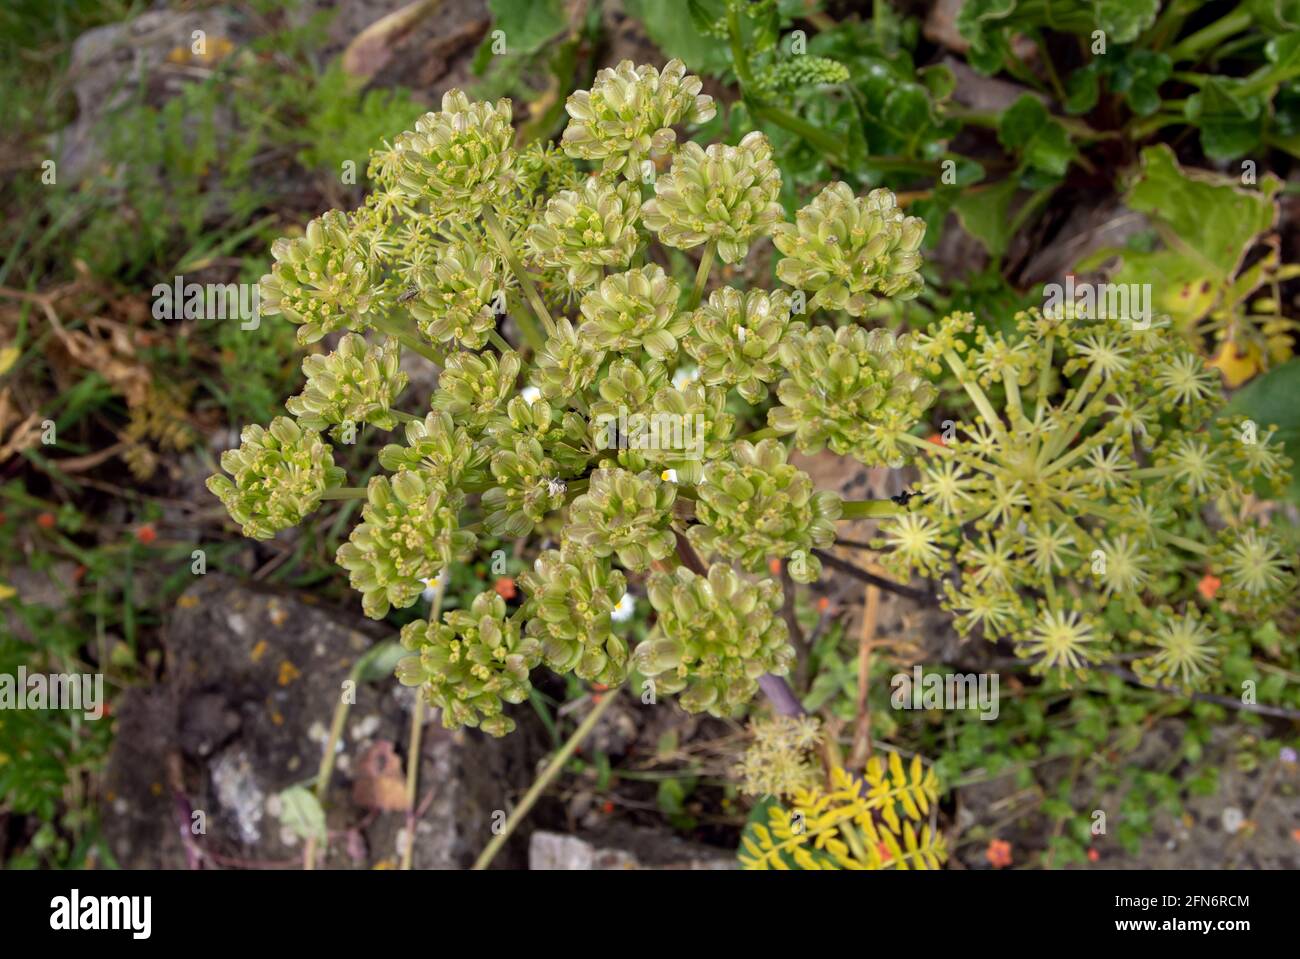 Angelica pachycarpa or portuguese or shiny leaved plant with flowers and seed Stock Photo